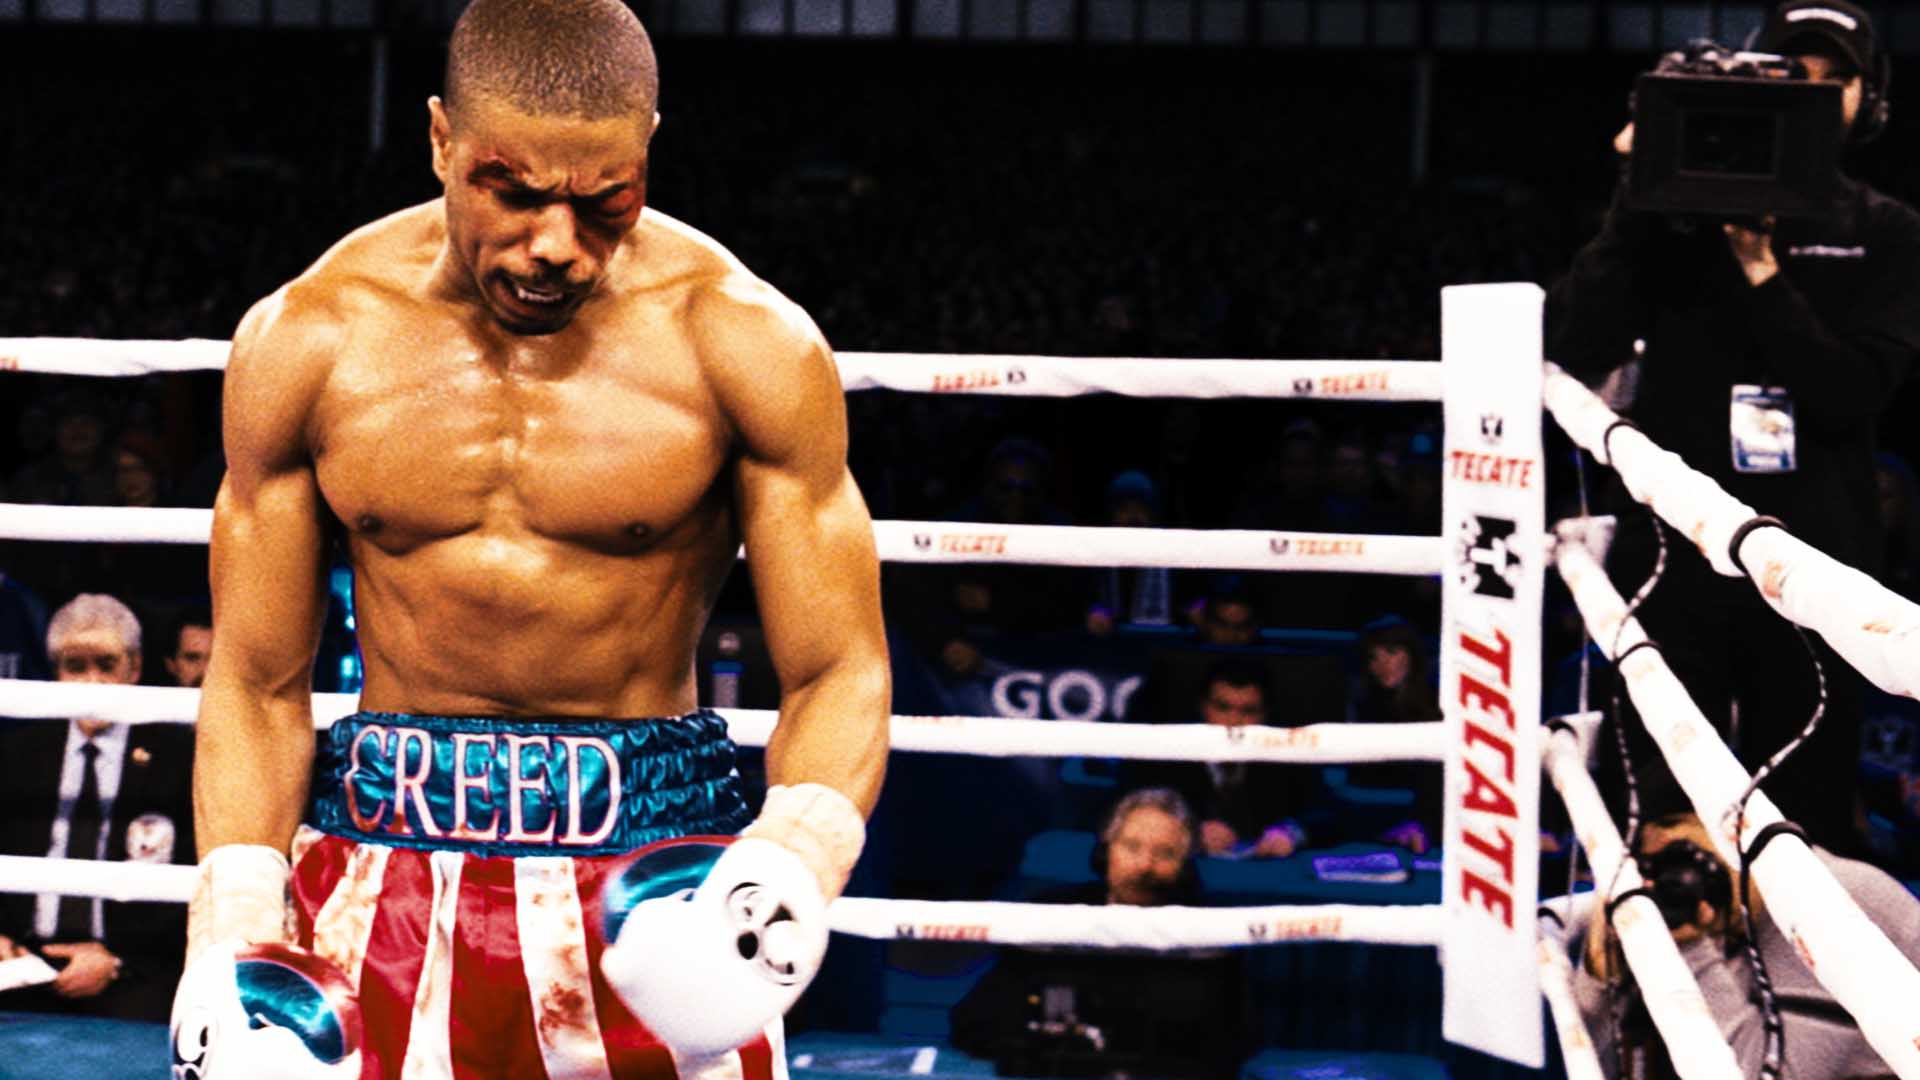 Creed wallpaper, Movie, HQ Creed pictureK Wallpaper 2019